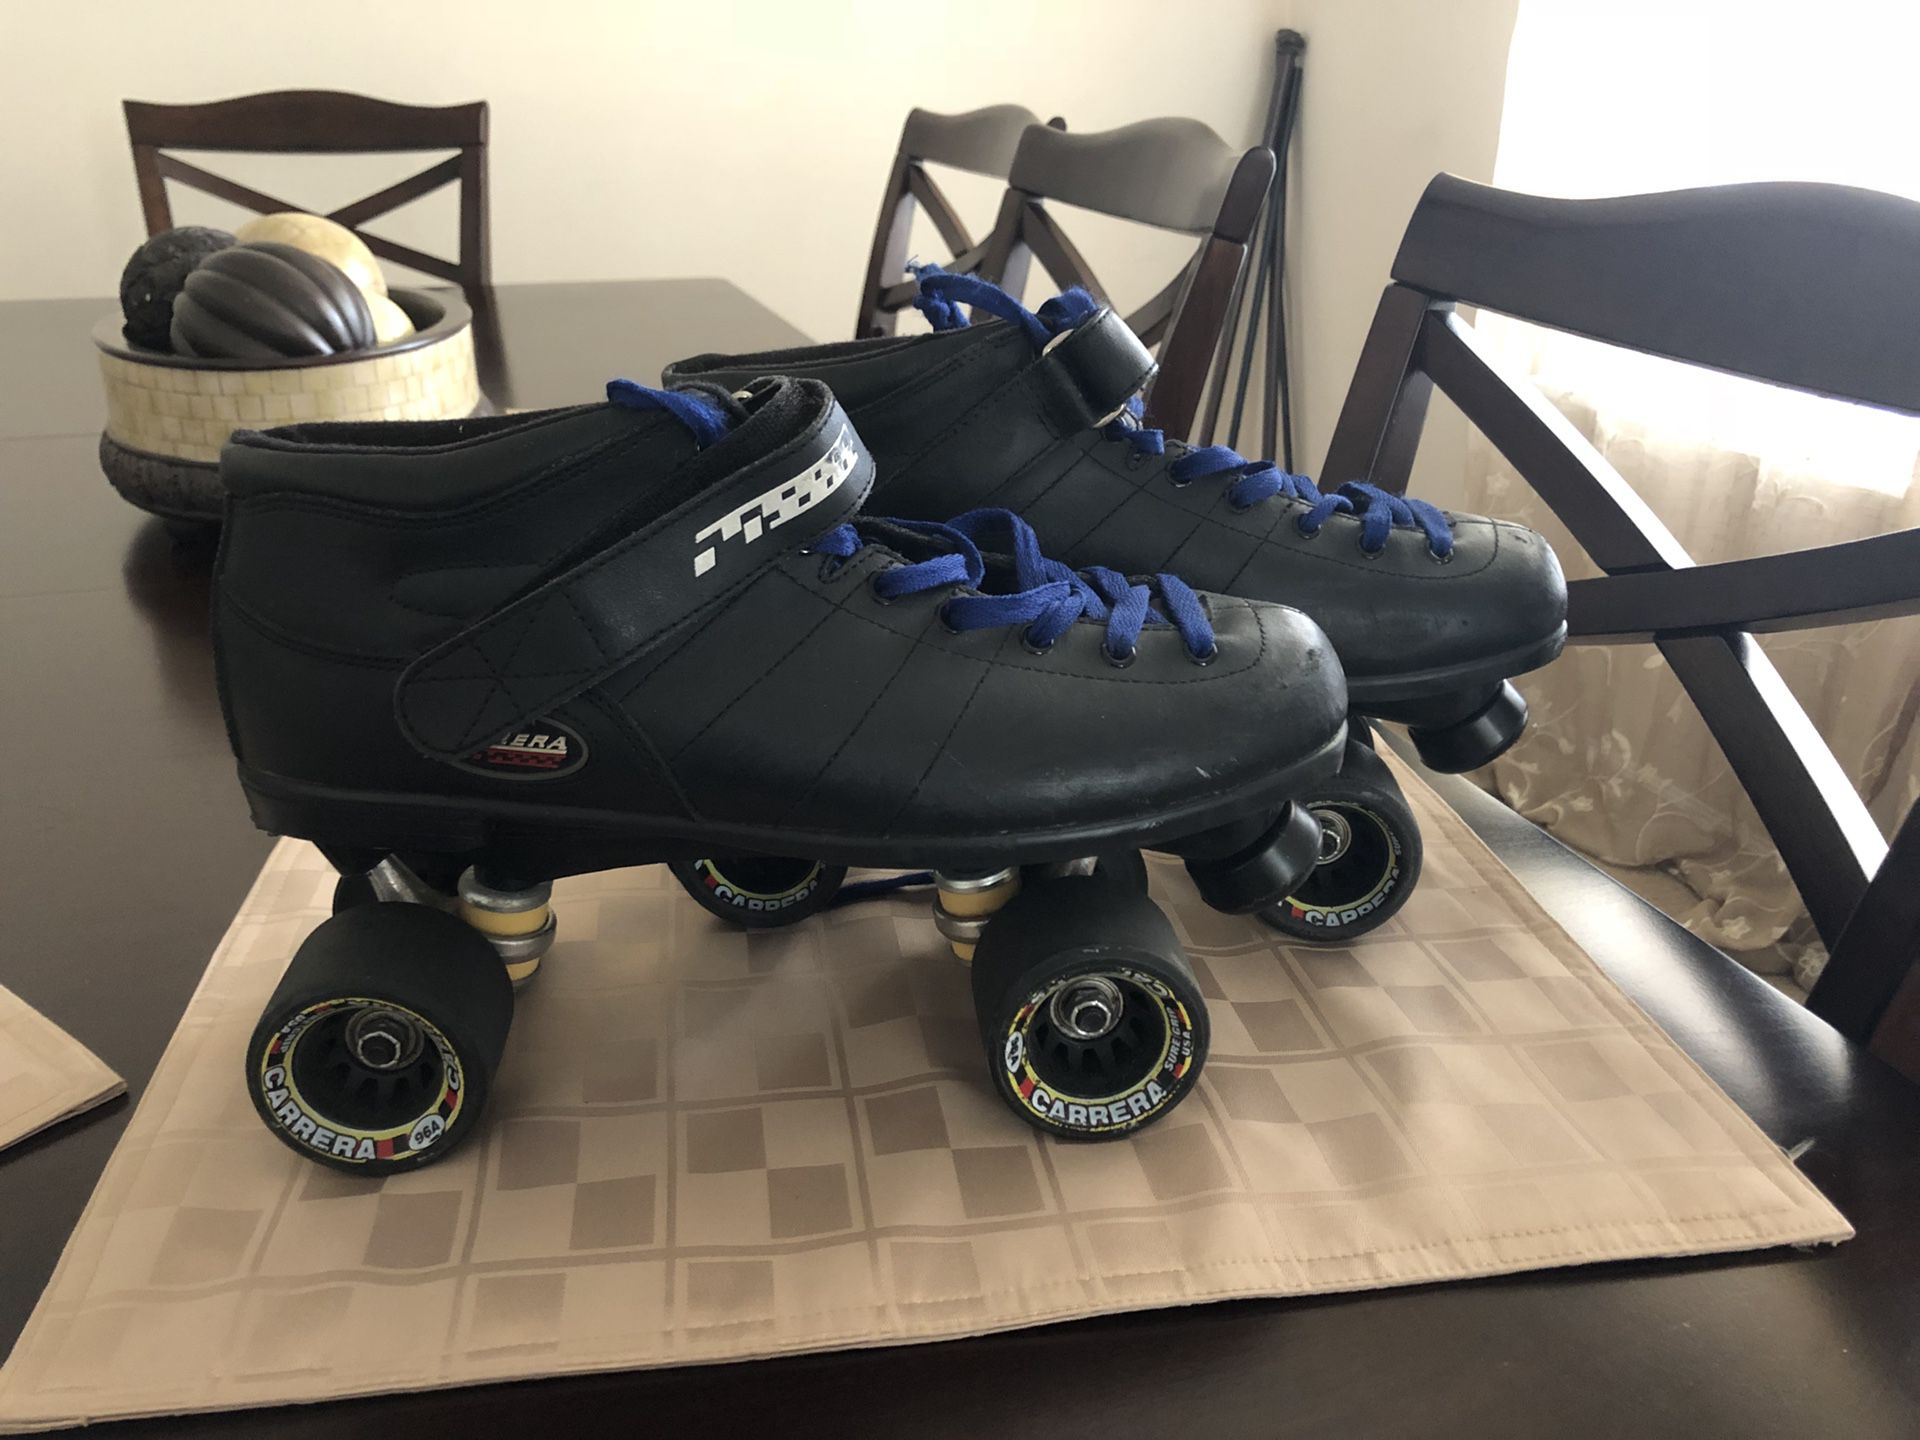 Carrera Men's Roller Skates size 13 for Sale in Indianapolis, IN - OfferUp